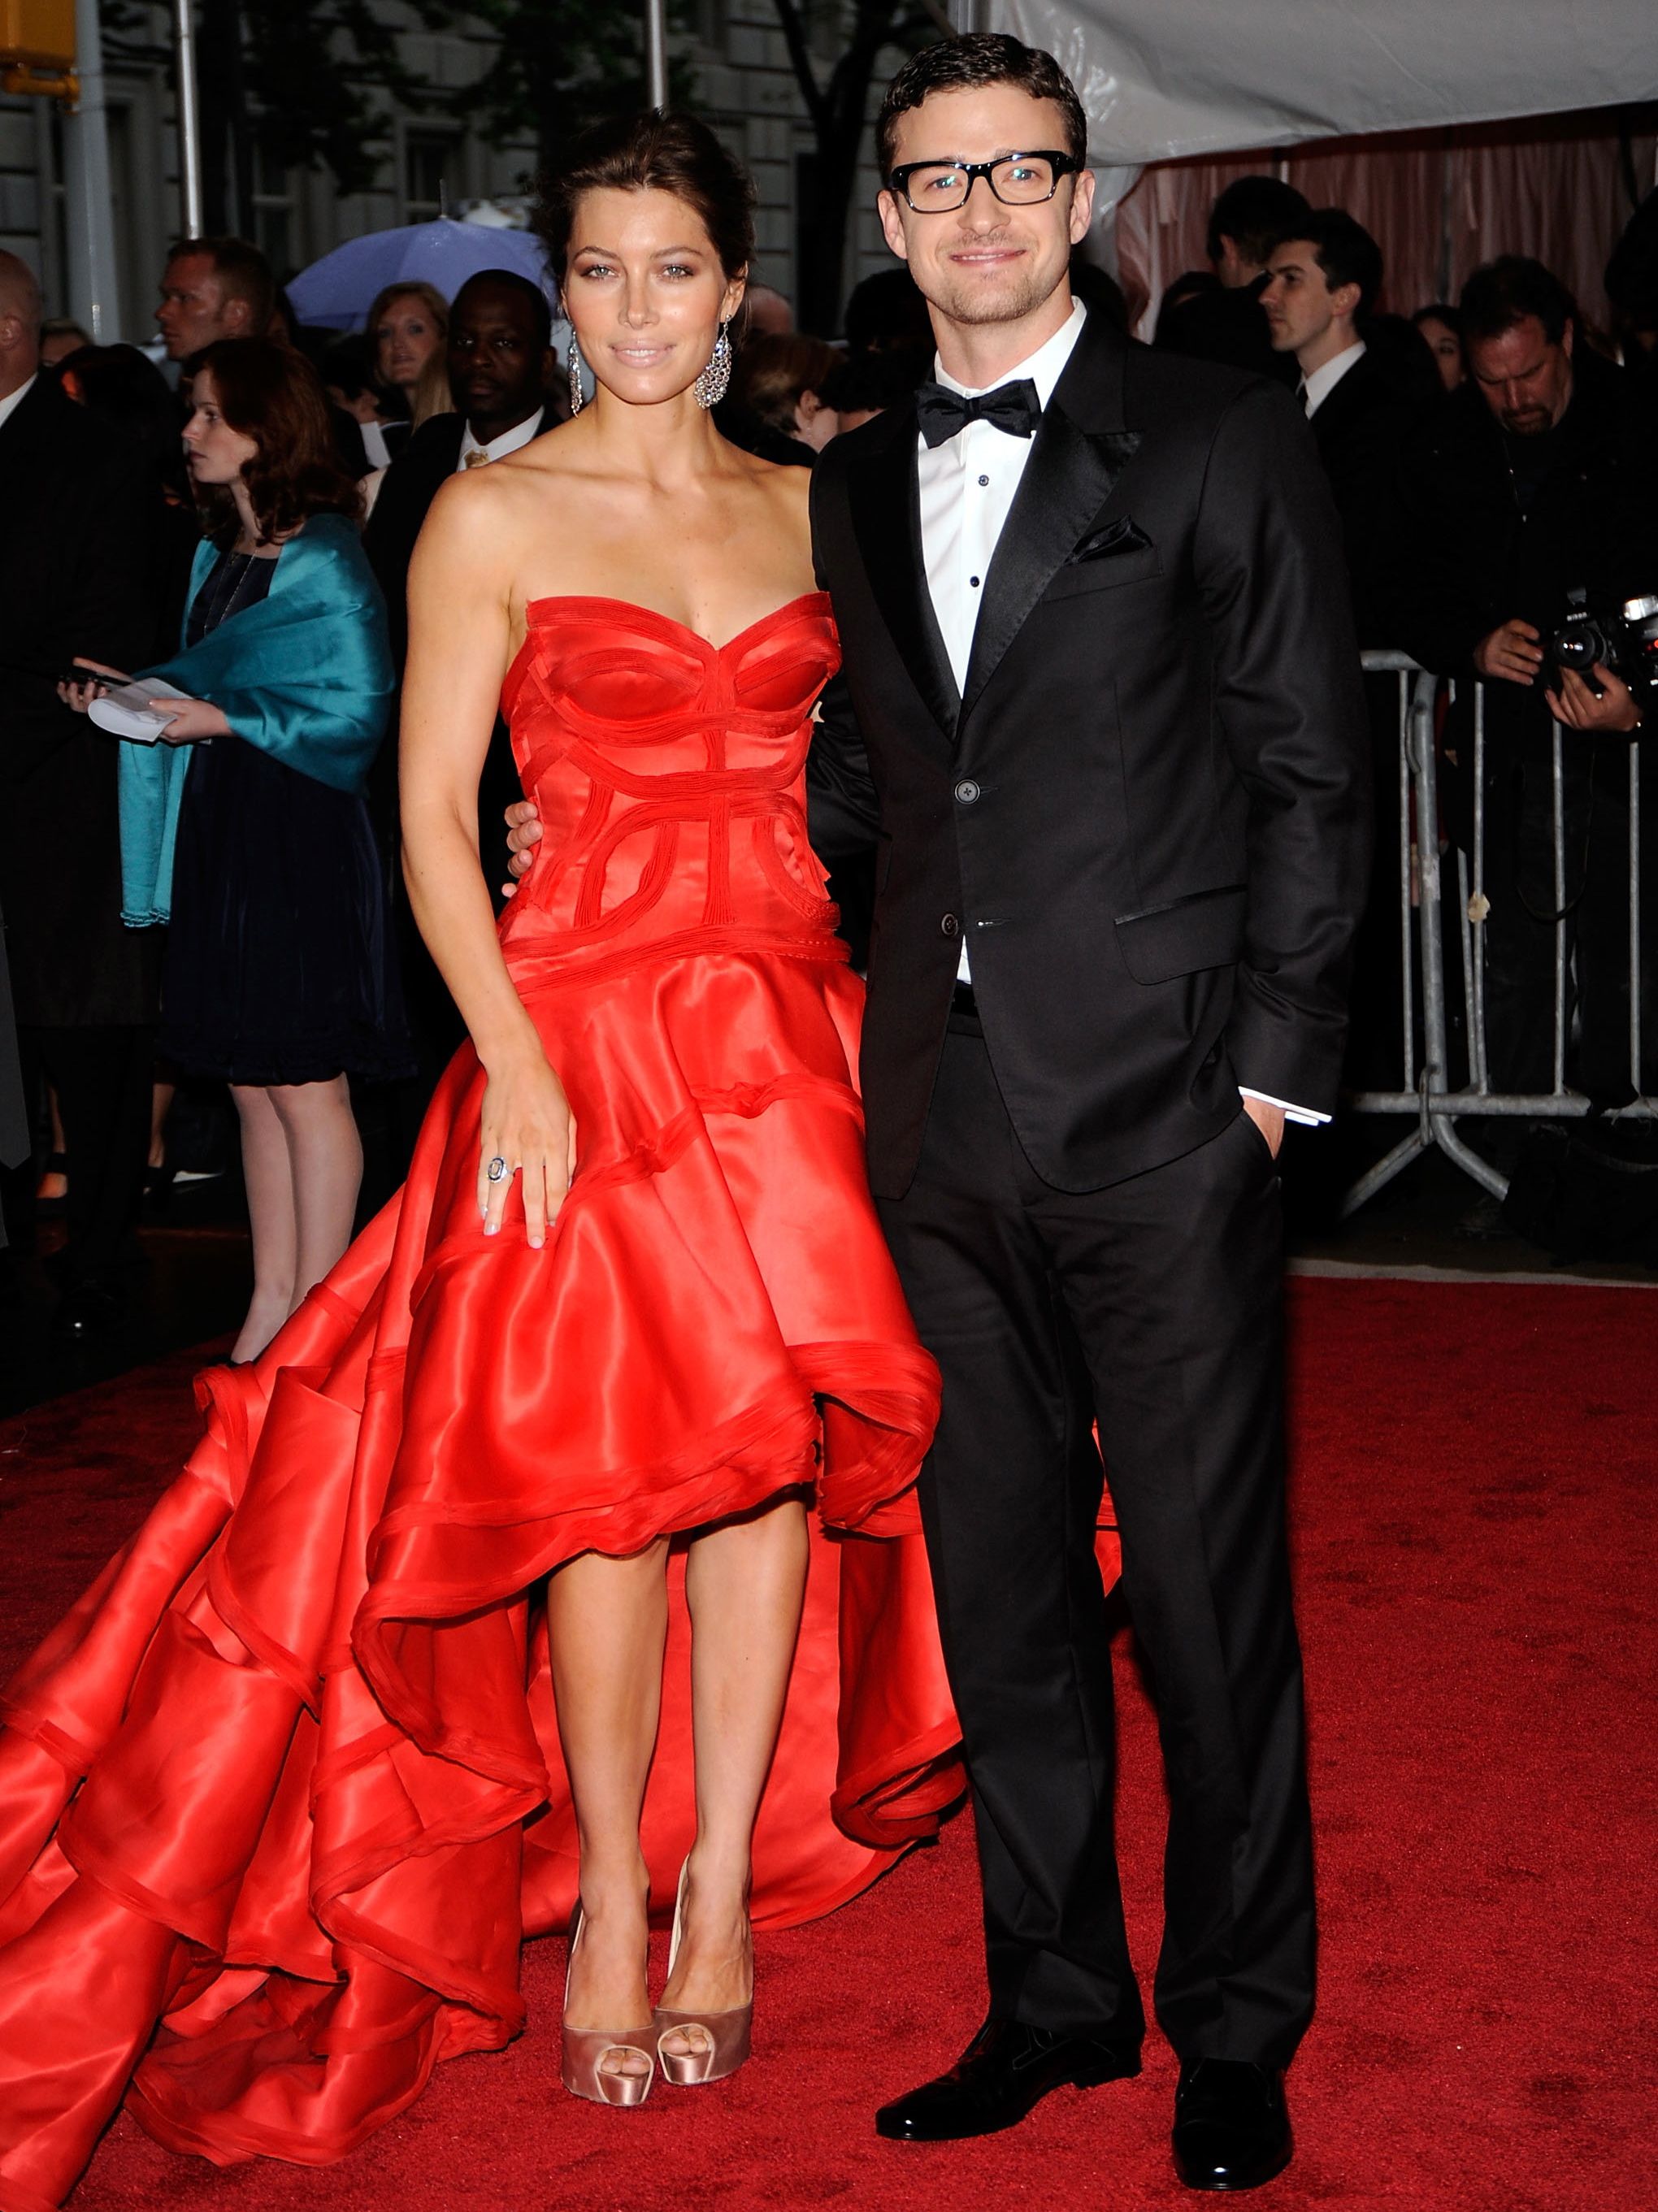 Wearing Red on a Date: Why Men Like Women in Red